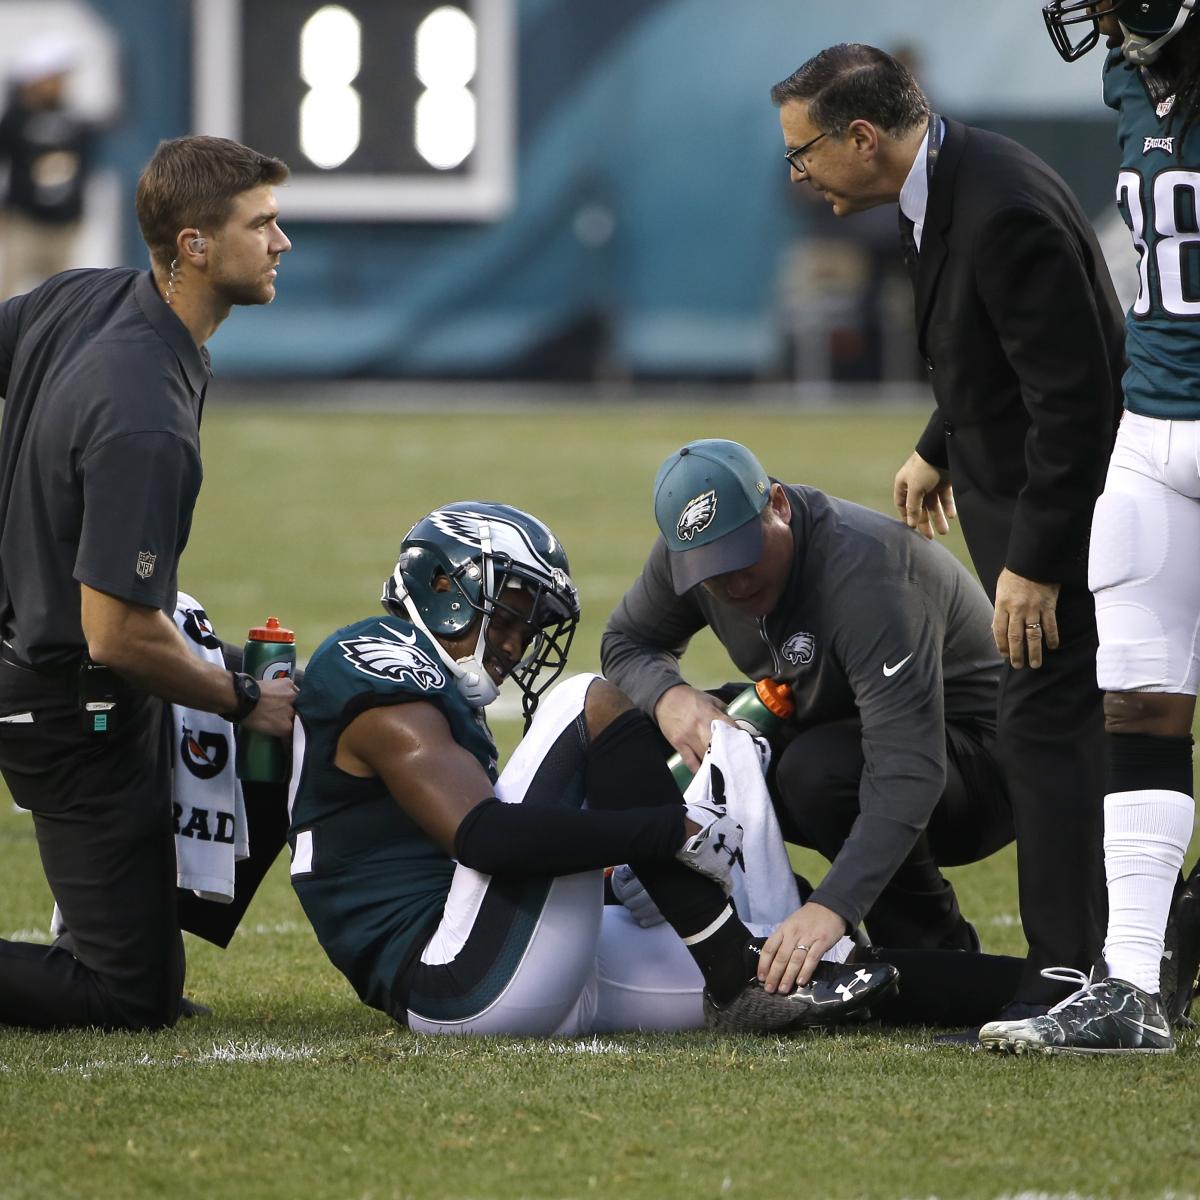 Eagles' Injuries Piling Up, Playoff Hopes Hang by a Thread After SNF